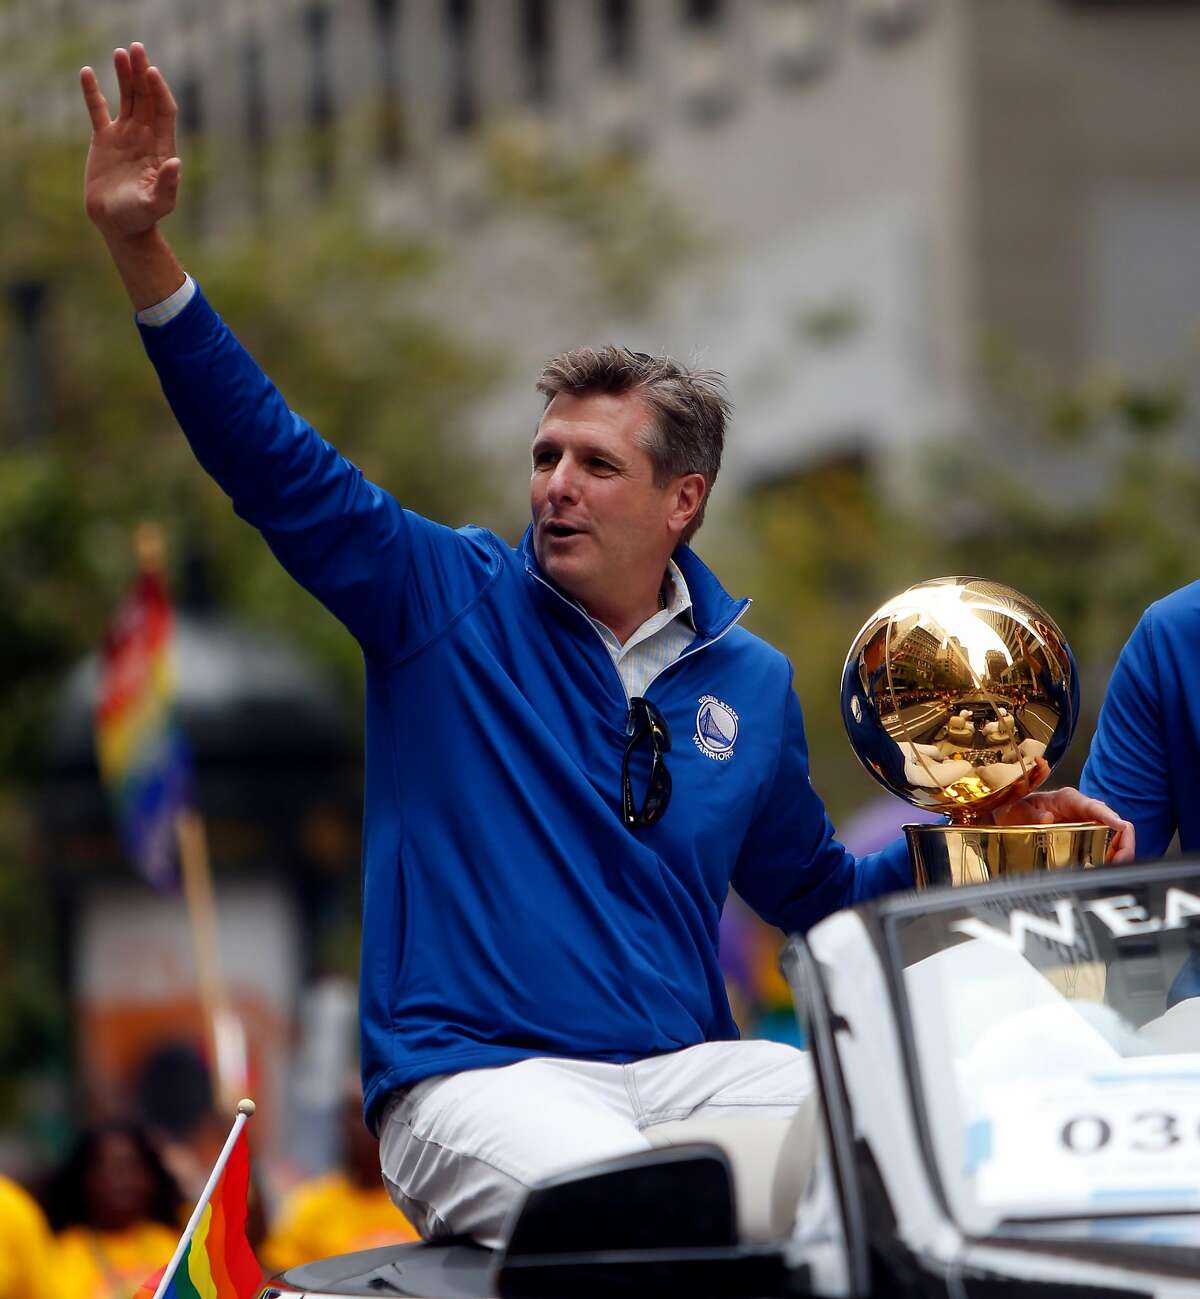 Golden State Warriors' President Rick Welts and the Larry O'Brien Trophy during the "Equality Without Exception" SF Pride Parade down Market Street in San Francisco, Calif., on Sunday, June 28, 2015.